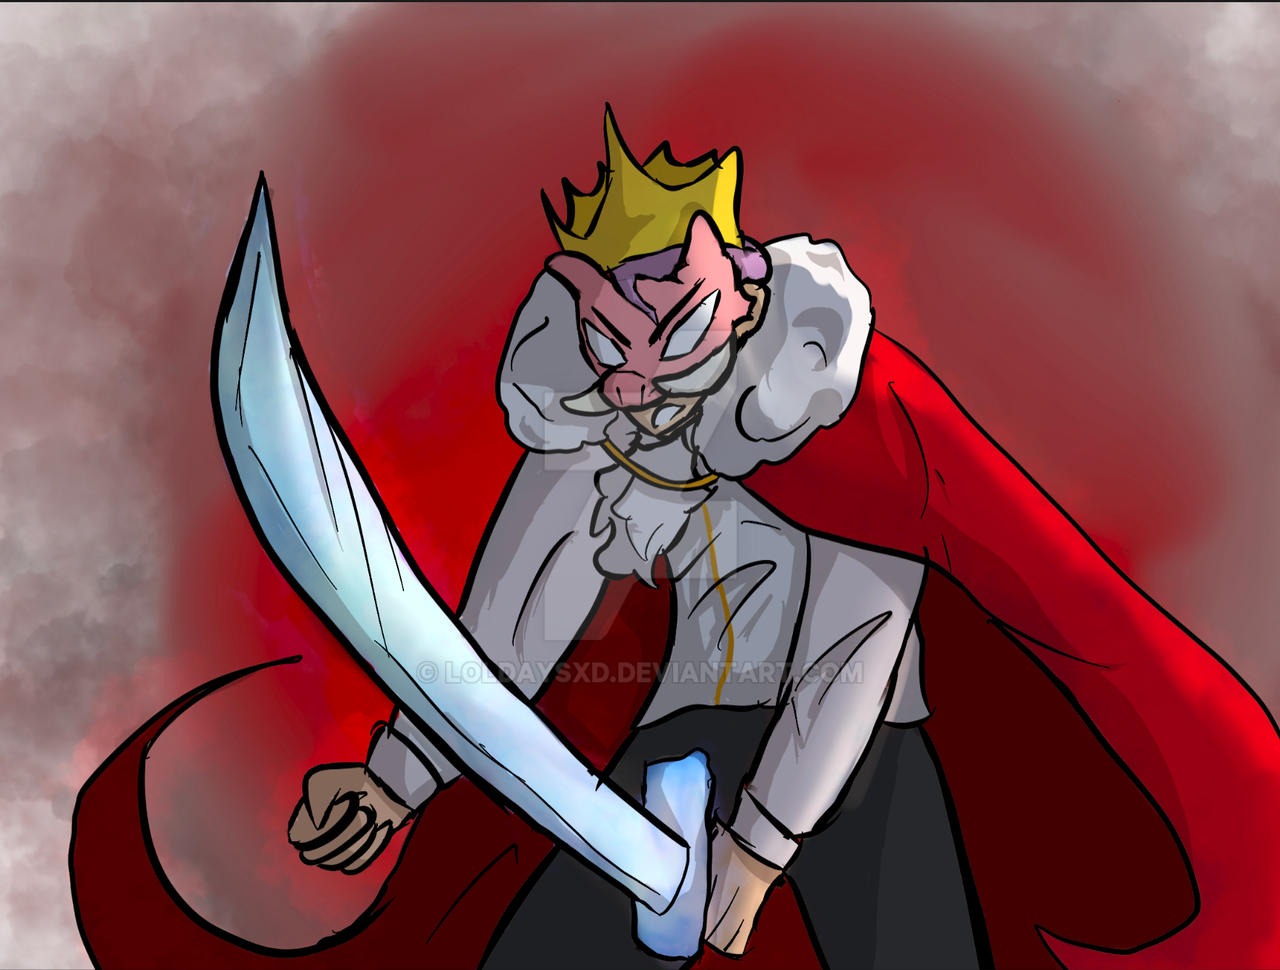 an art by me :) [PS: the sword and the technoblade pic and the